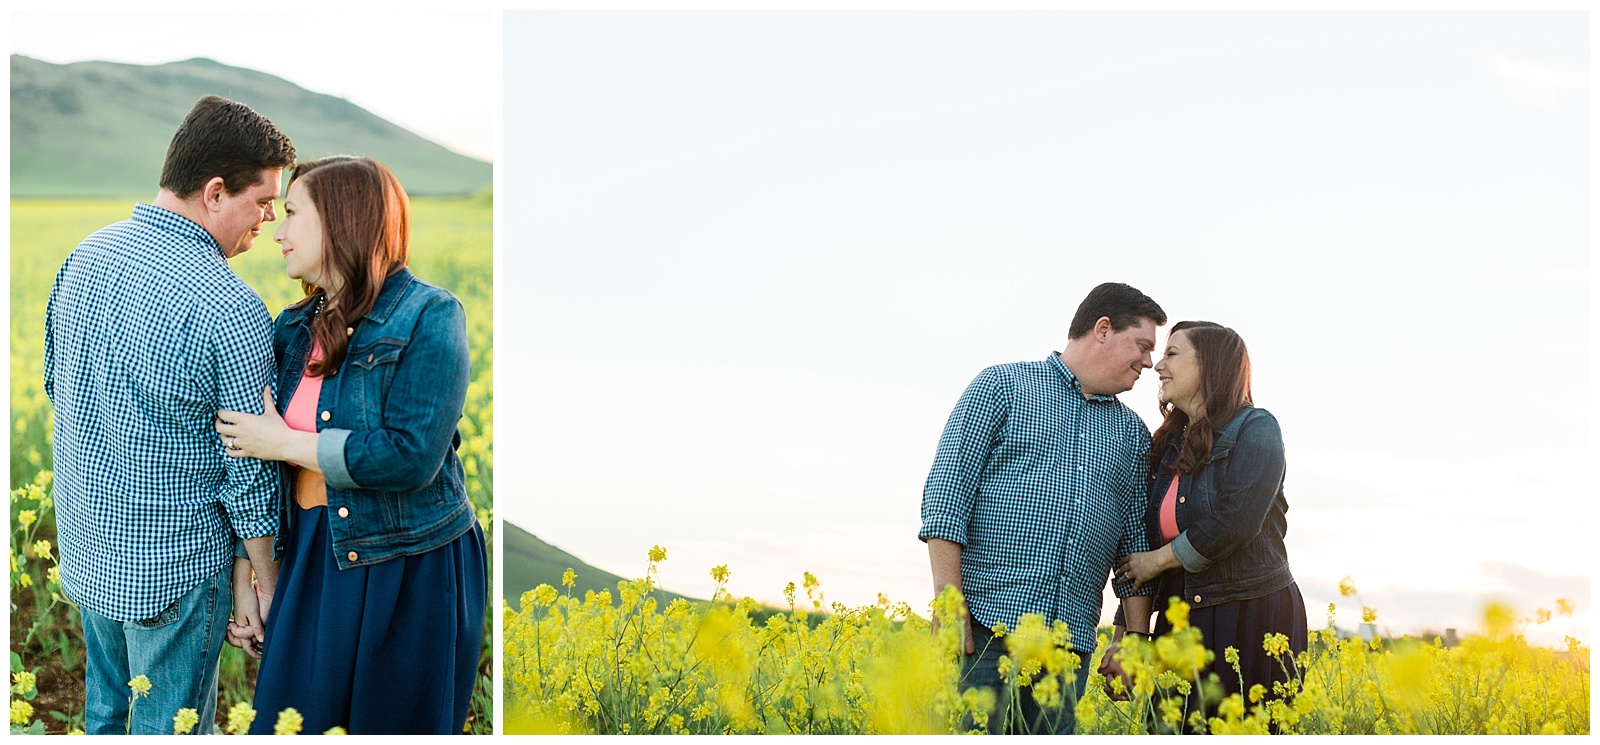 couple posing romantically in a wildflower field at sunset